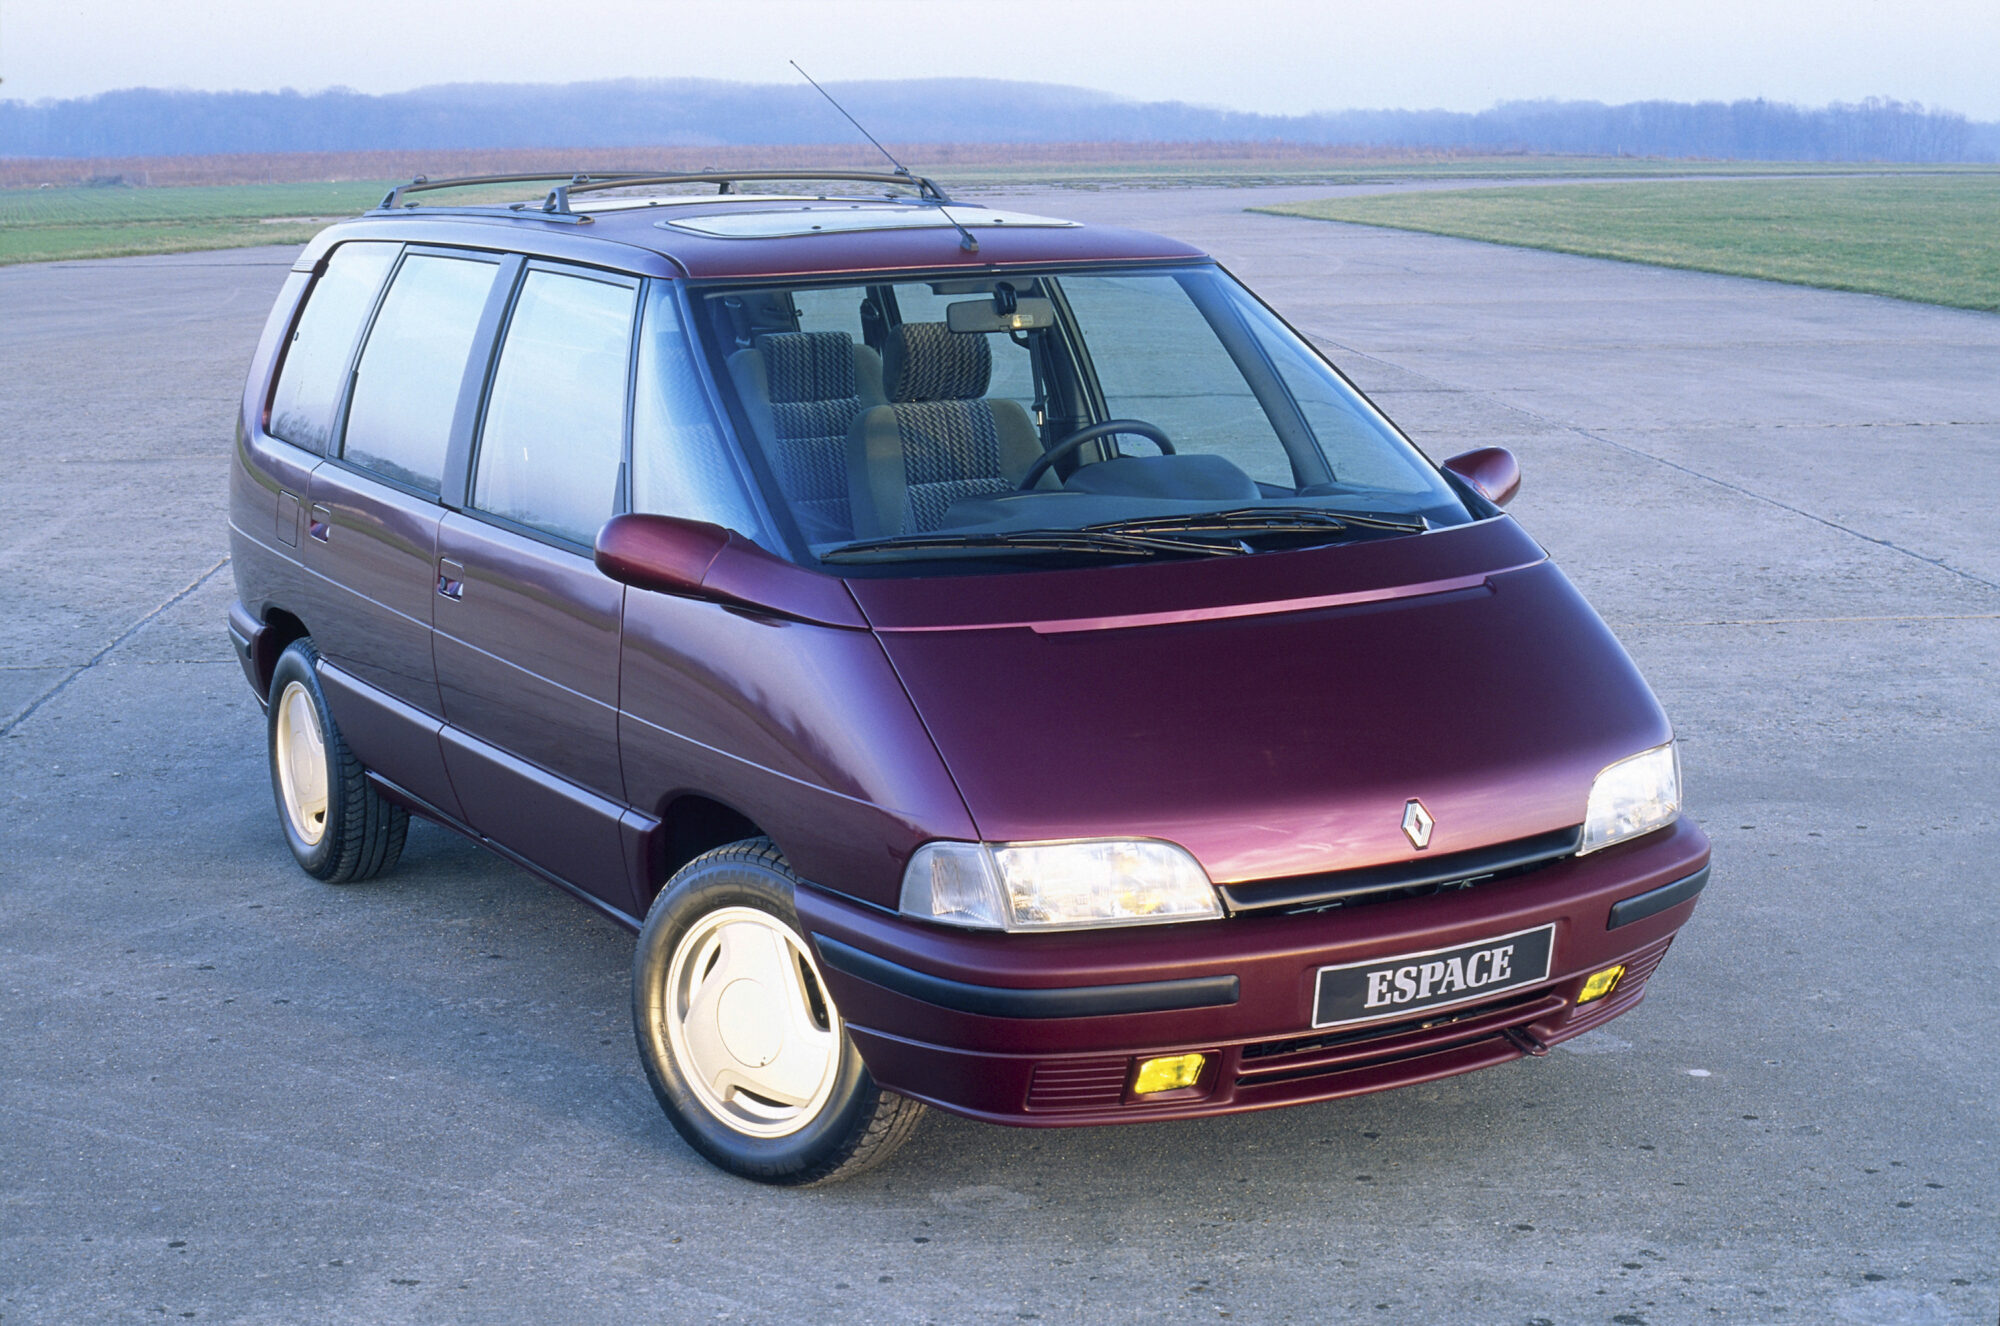 Story - There once was a vehicle named Espace, an iconic name going back 40 years